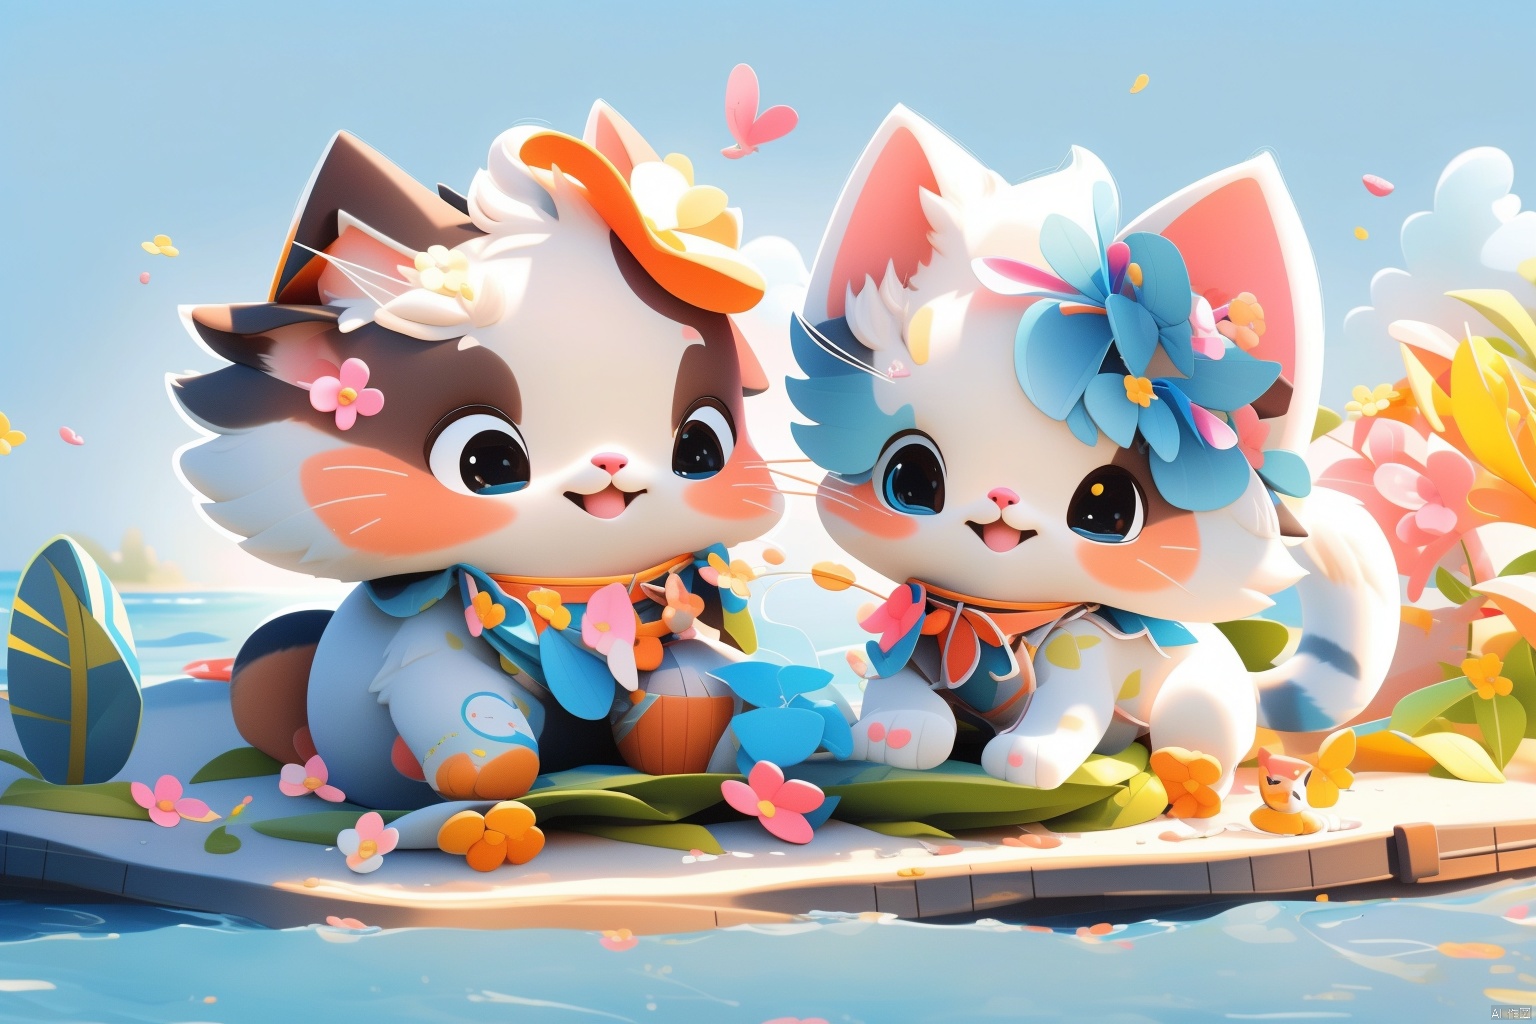  sunny,To play by the sea,
Bathing on the beach,
Camping, picnicking, feeling the wind.In Hainan, 
At this time mood at this time day, nothing little fairy., light master, （maomika：1.2）,(1cat:1.3),Lie on one's stomach, maomika, cat, Hanamawine, three views,cure, chibi, MG xiongmao, Dog_Teddy,